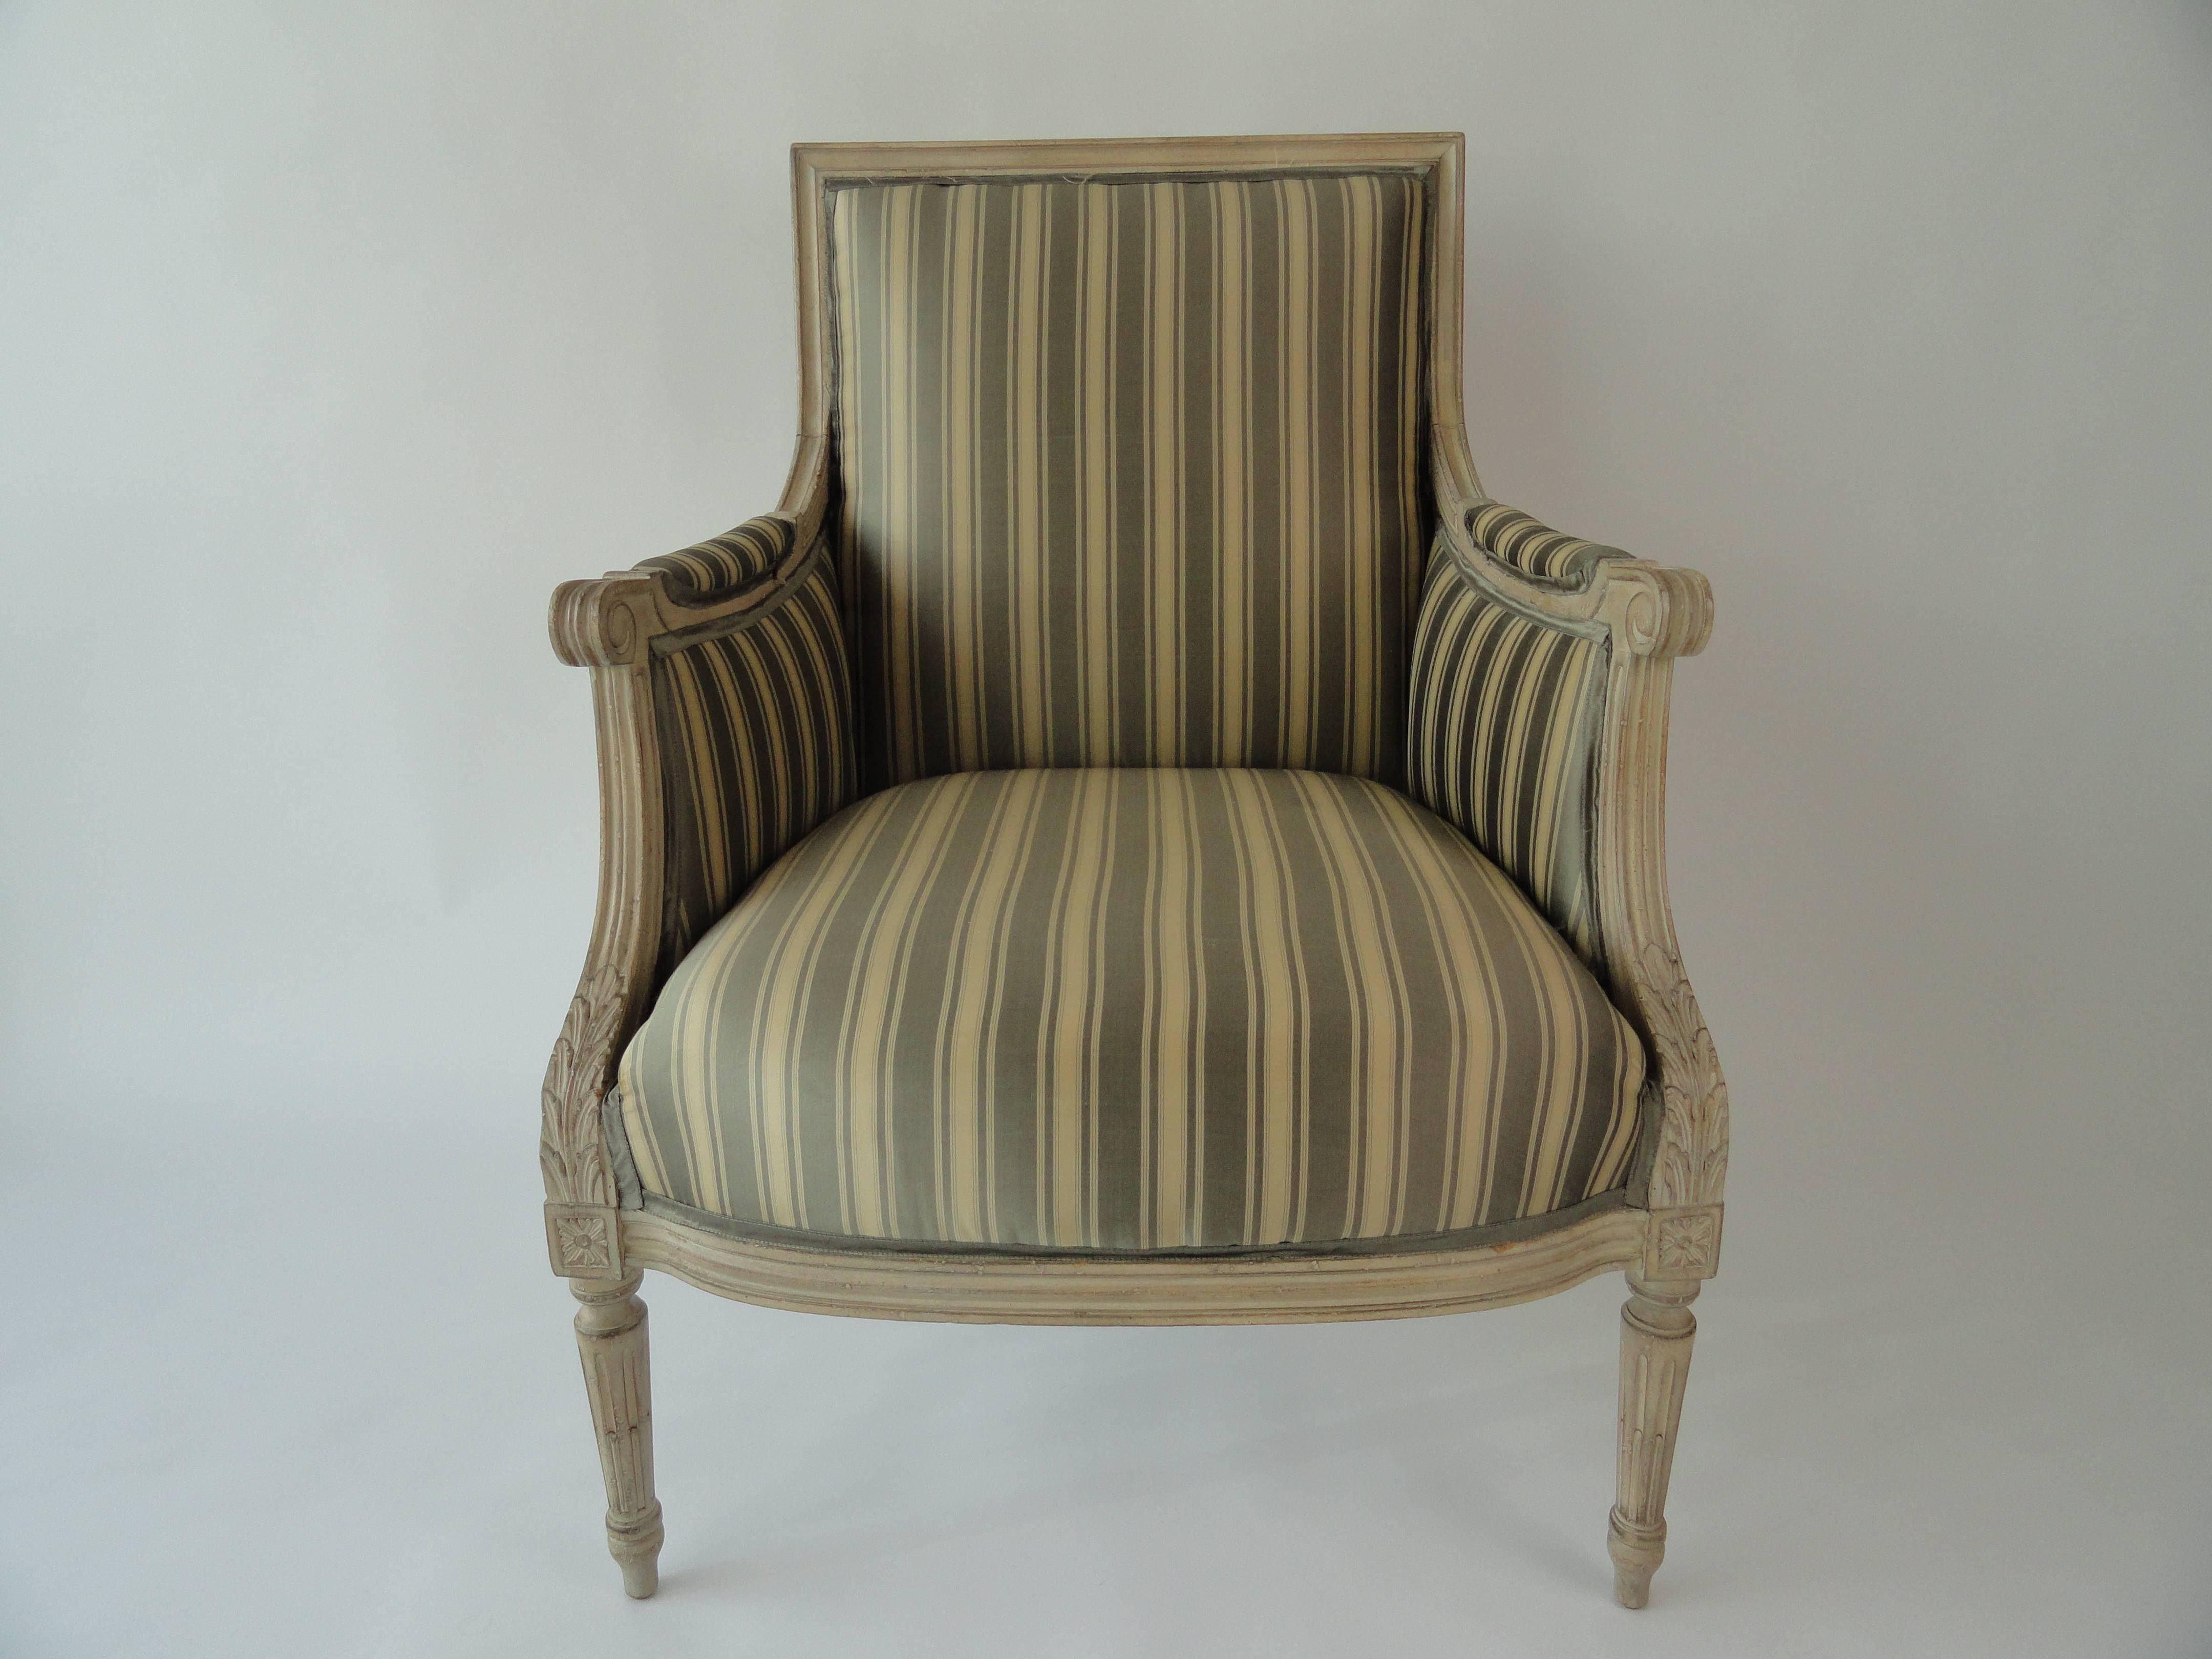 Louis XVI style painted bergere with carved arm detail. Upholstered in gray on beige striped Clarence House silk with silk self-taping.